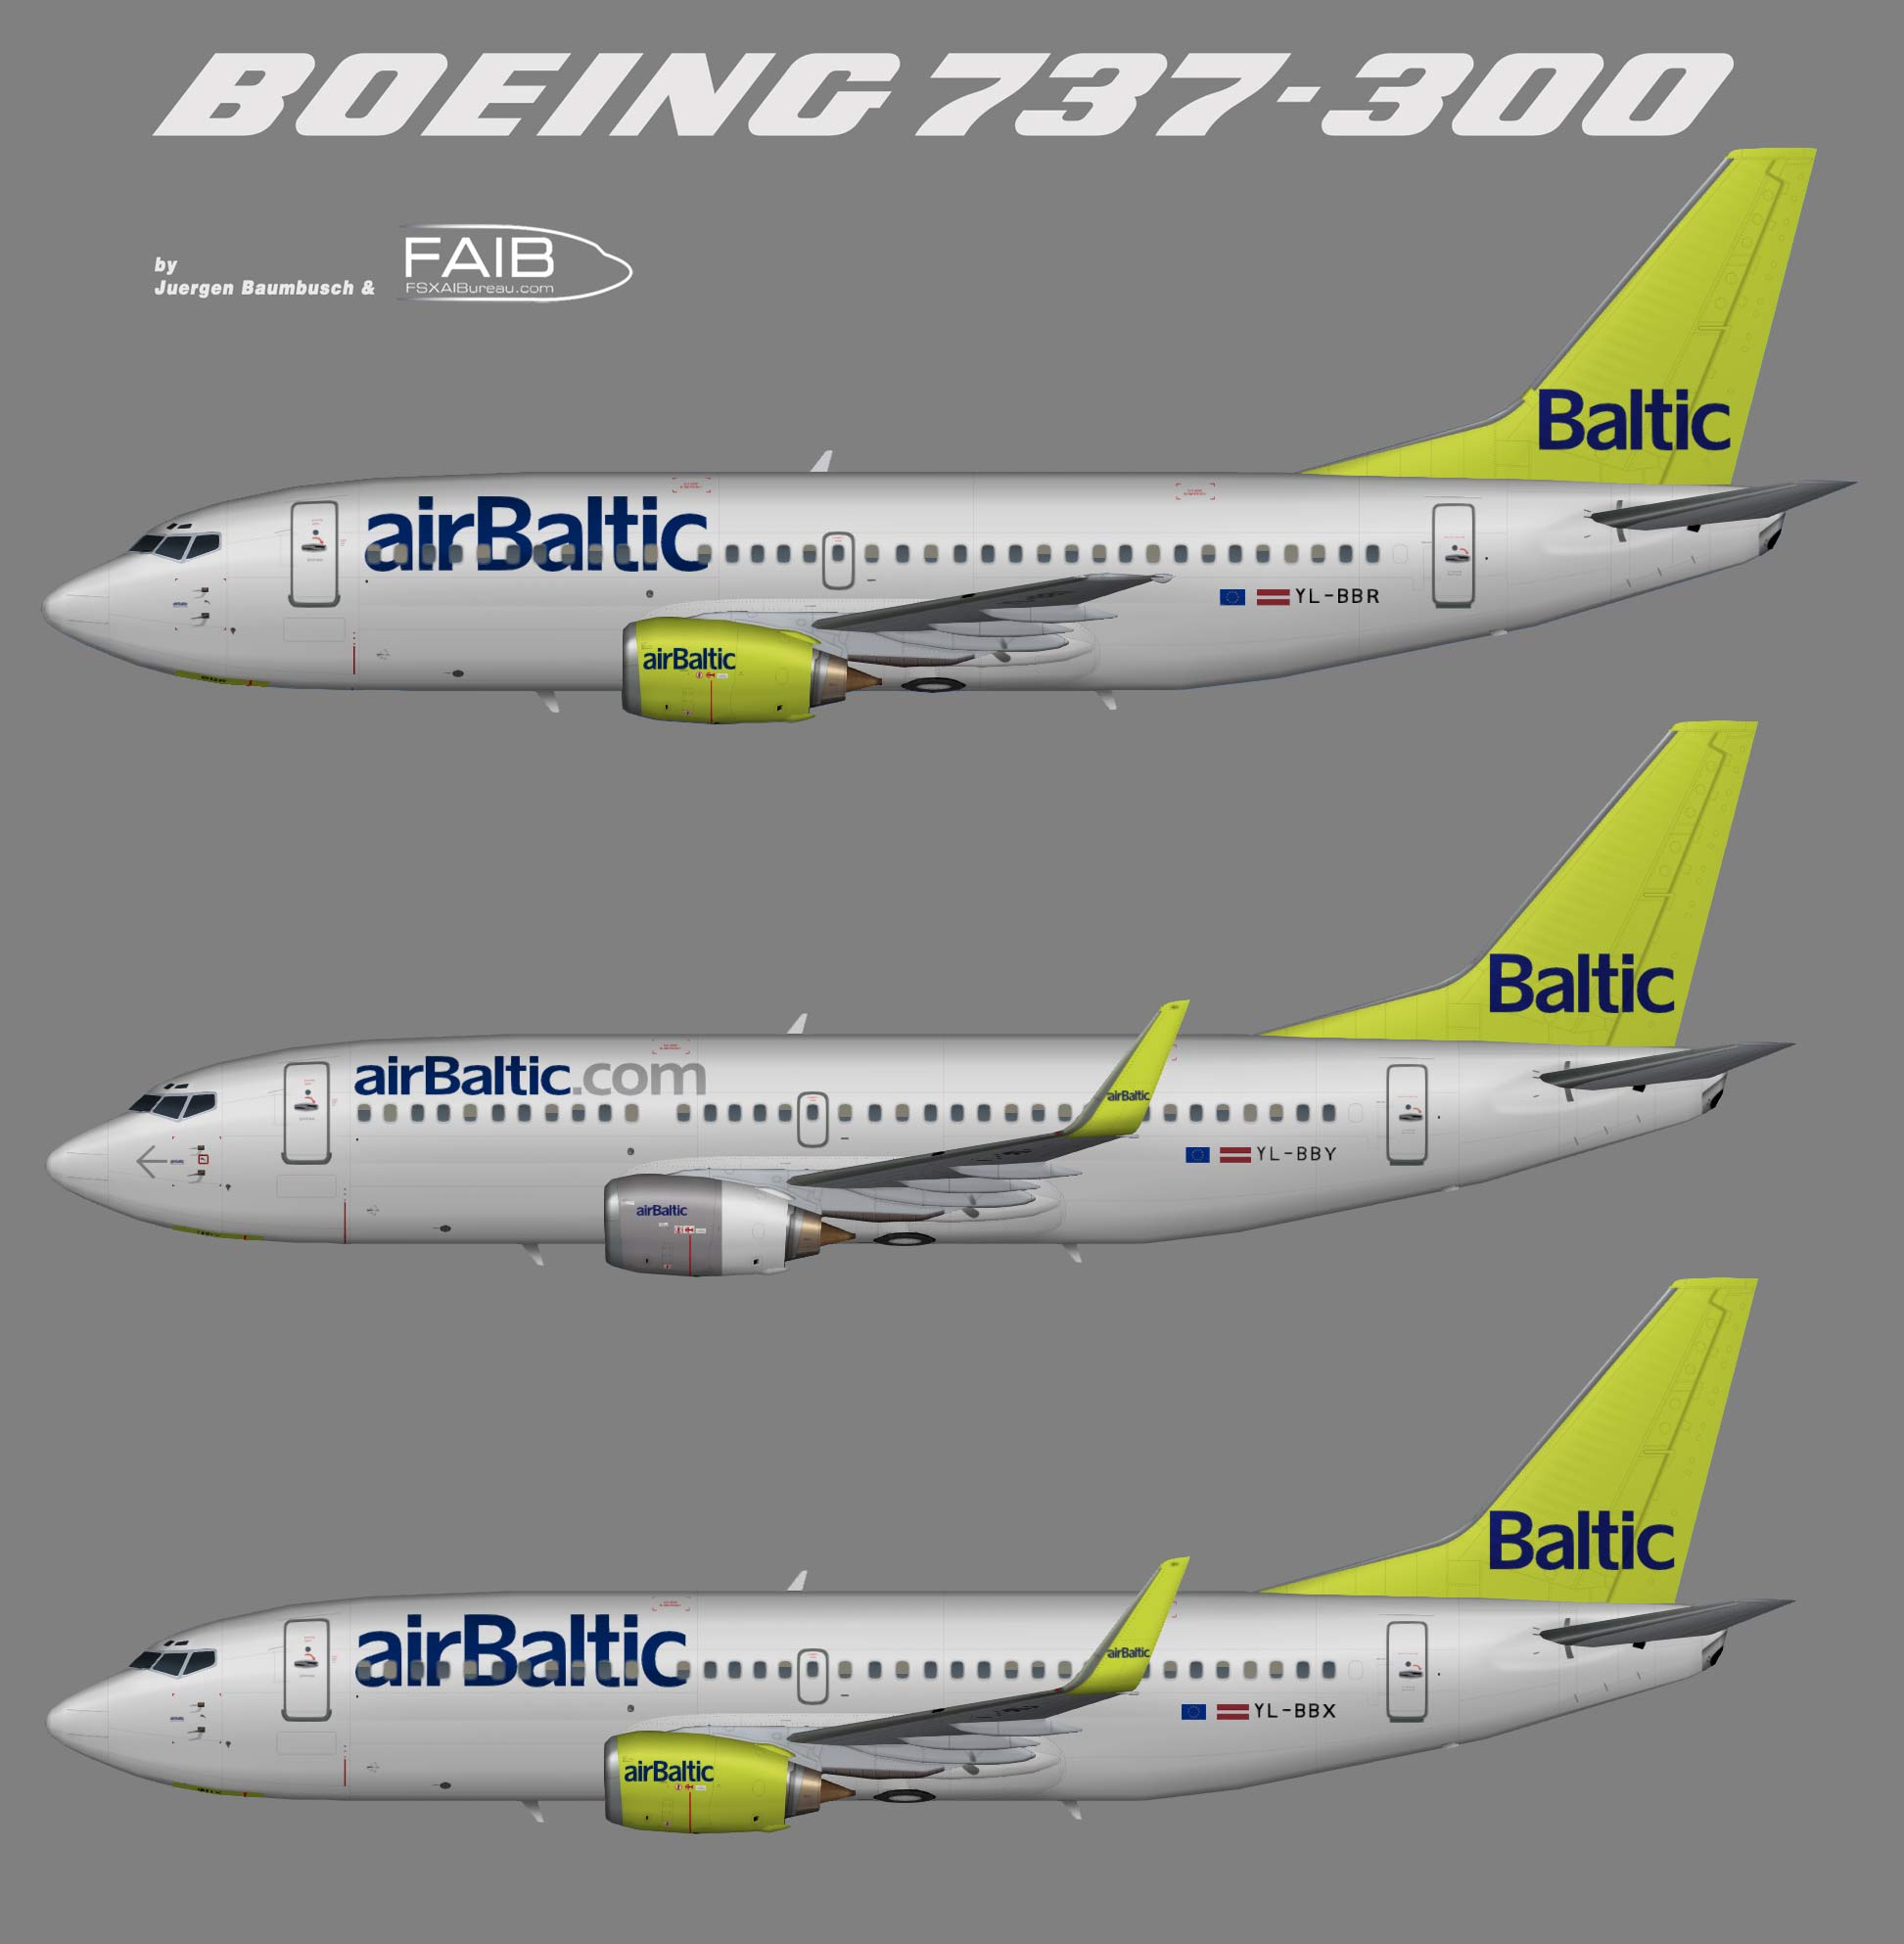 AirBaltic Boeing 737-300